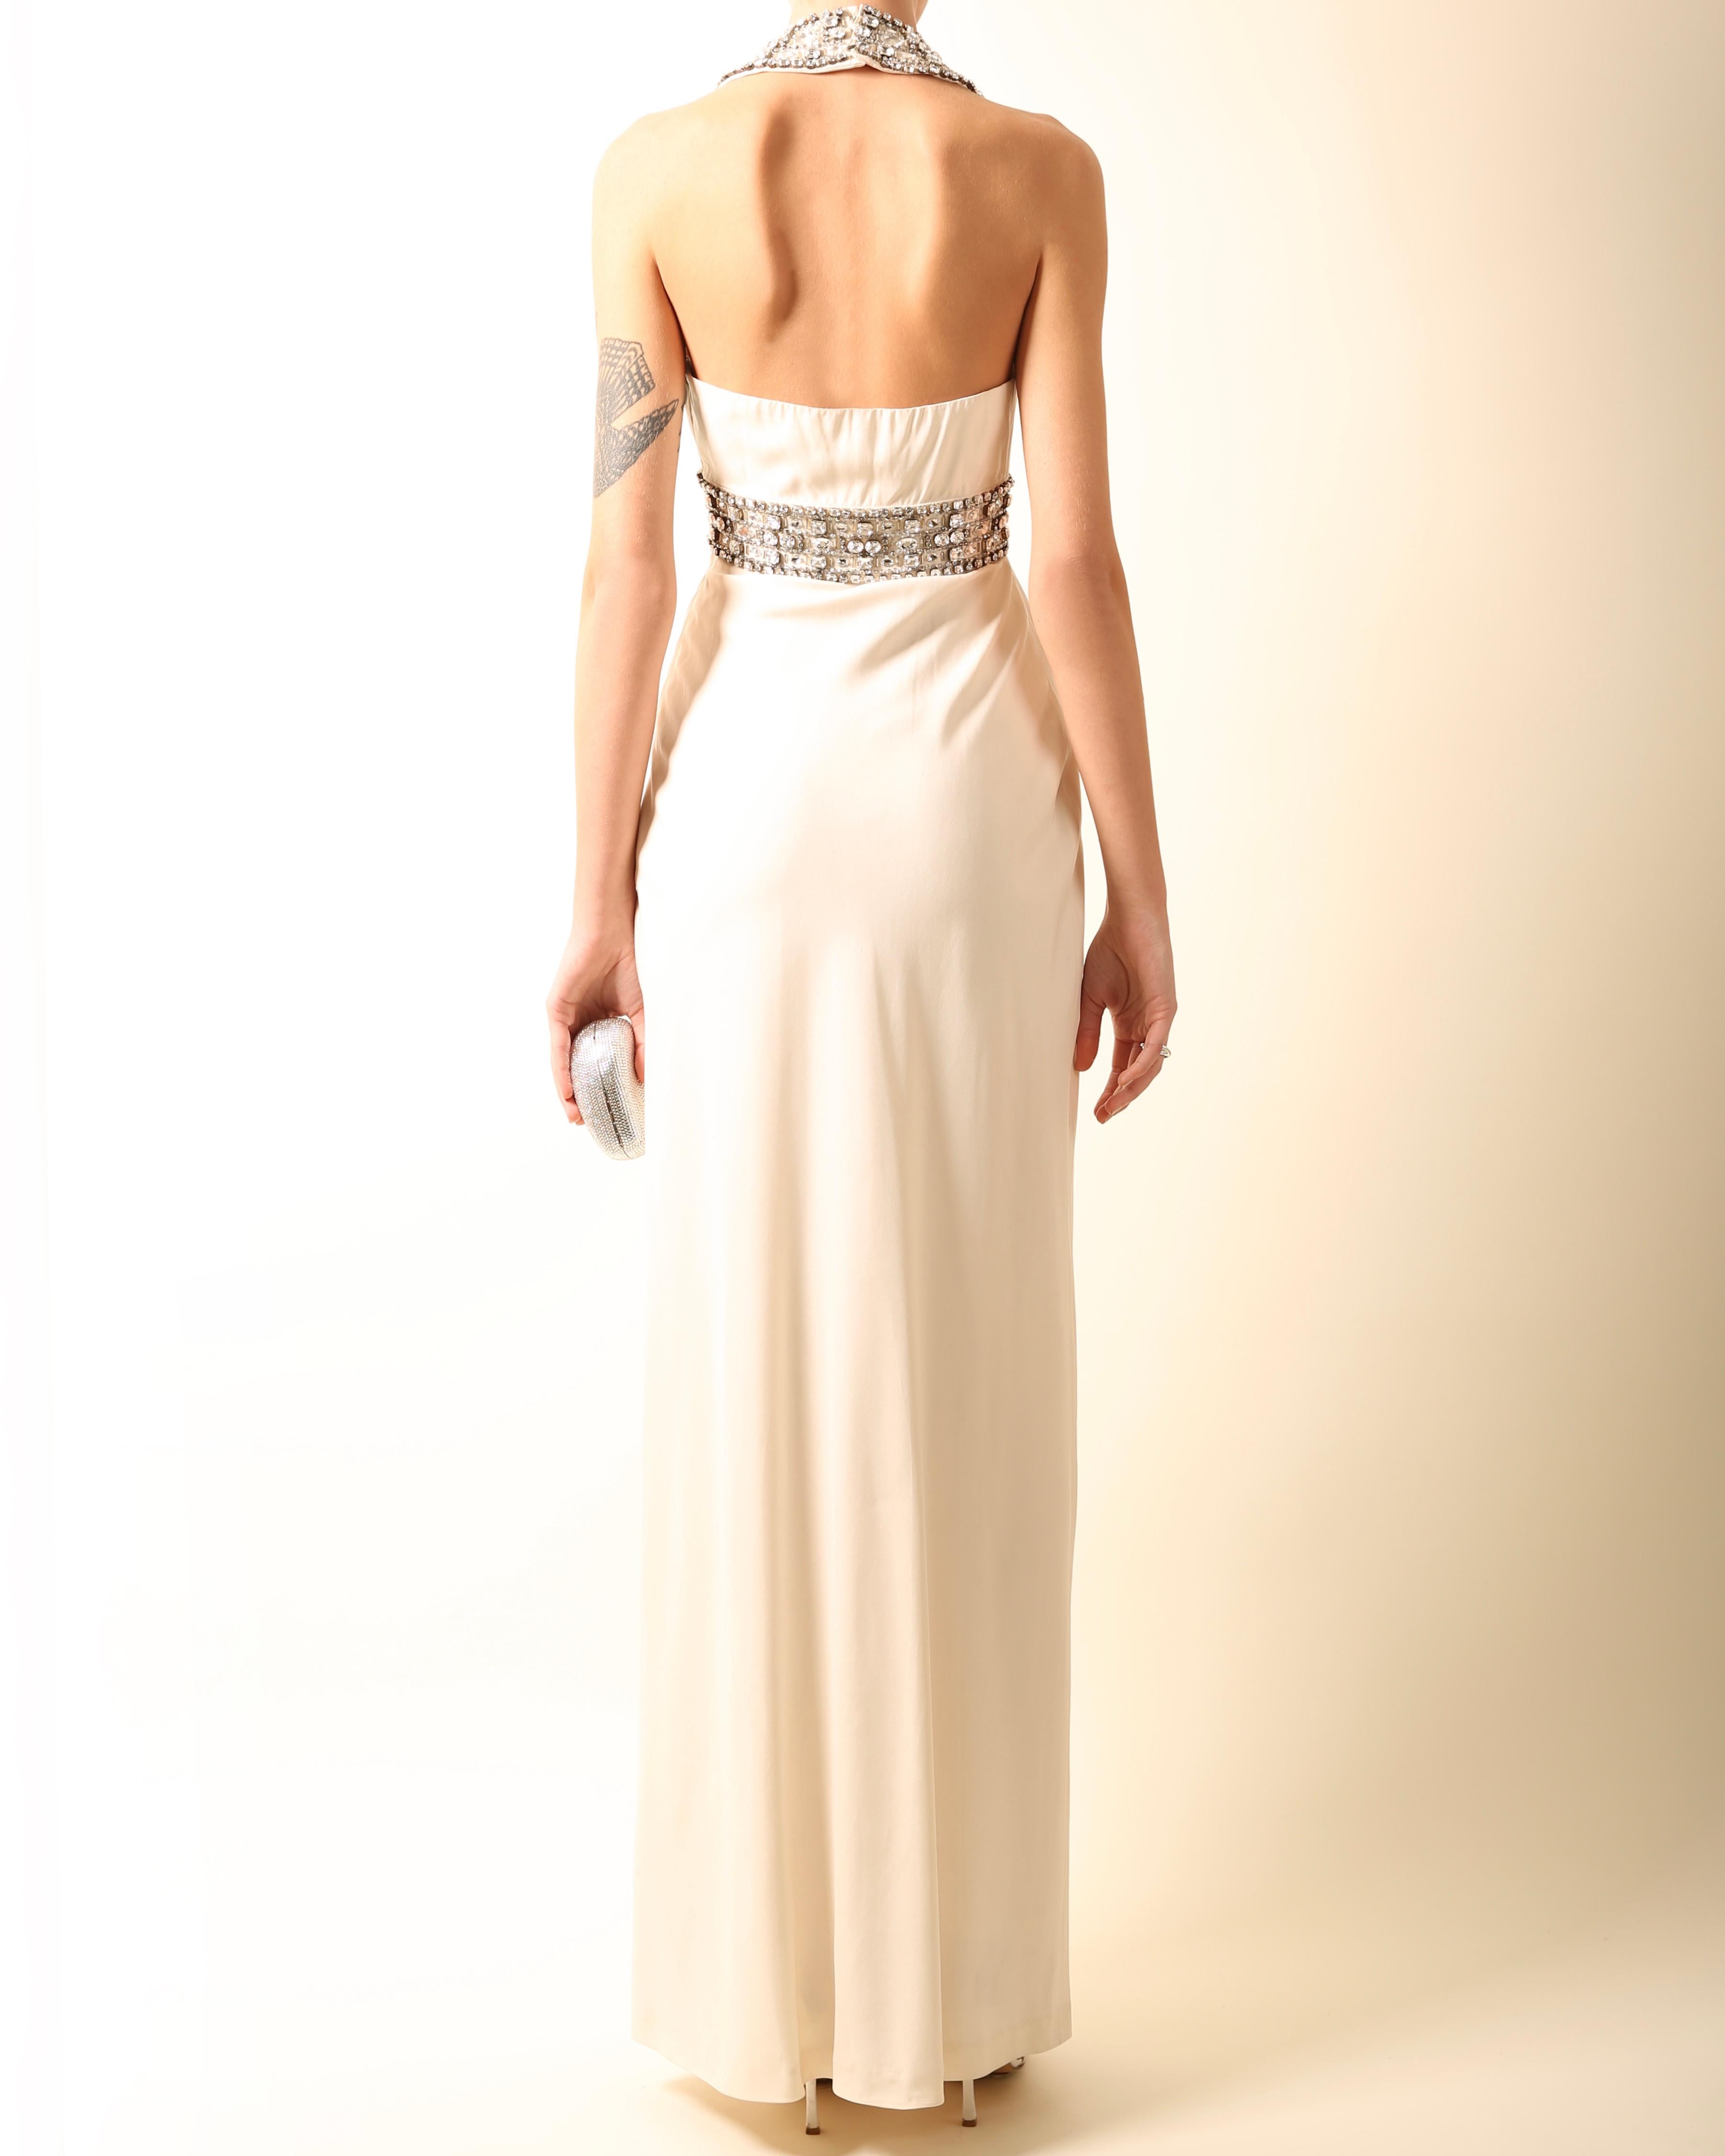 Azzaro white ivory crystal embellished low cut out halter neck dress gown 36 7